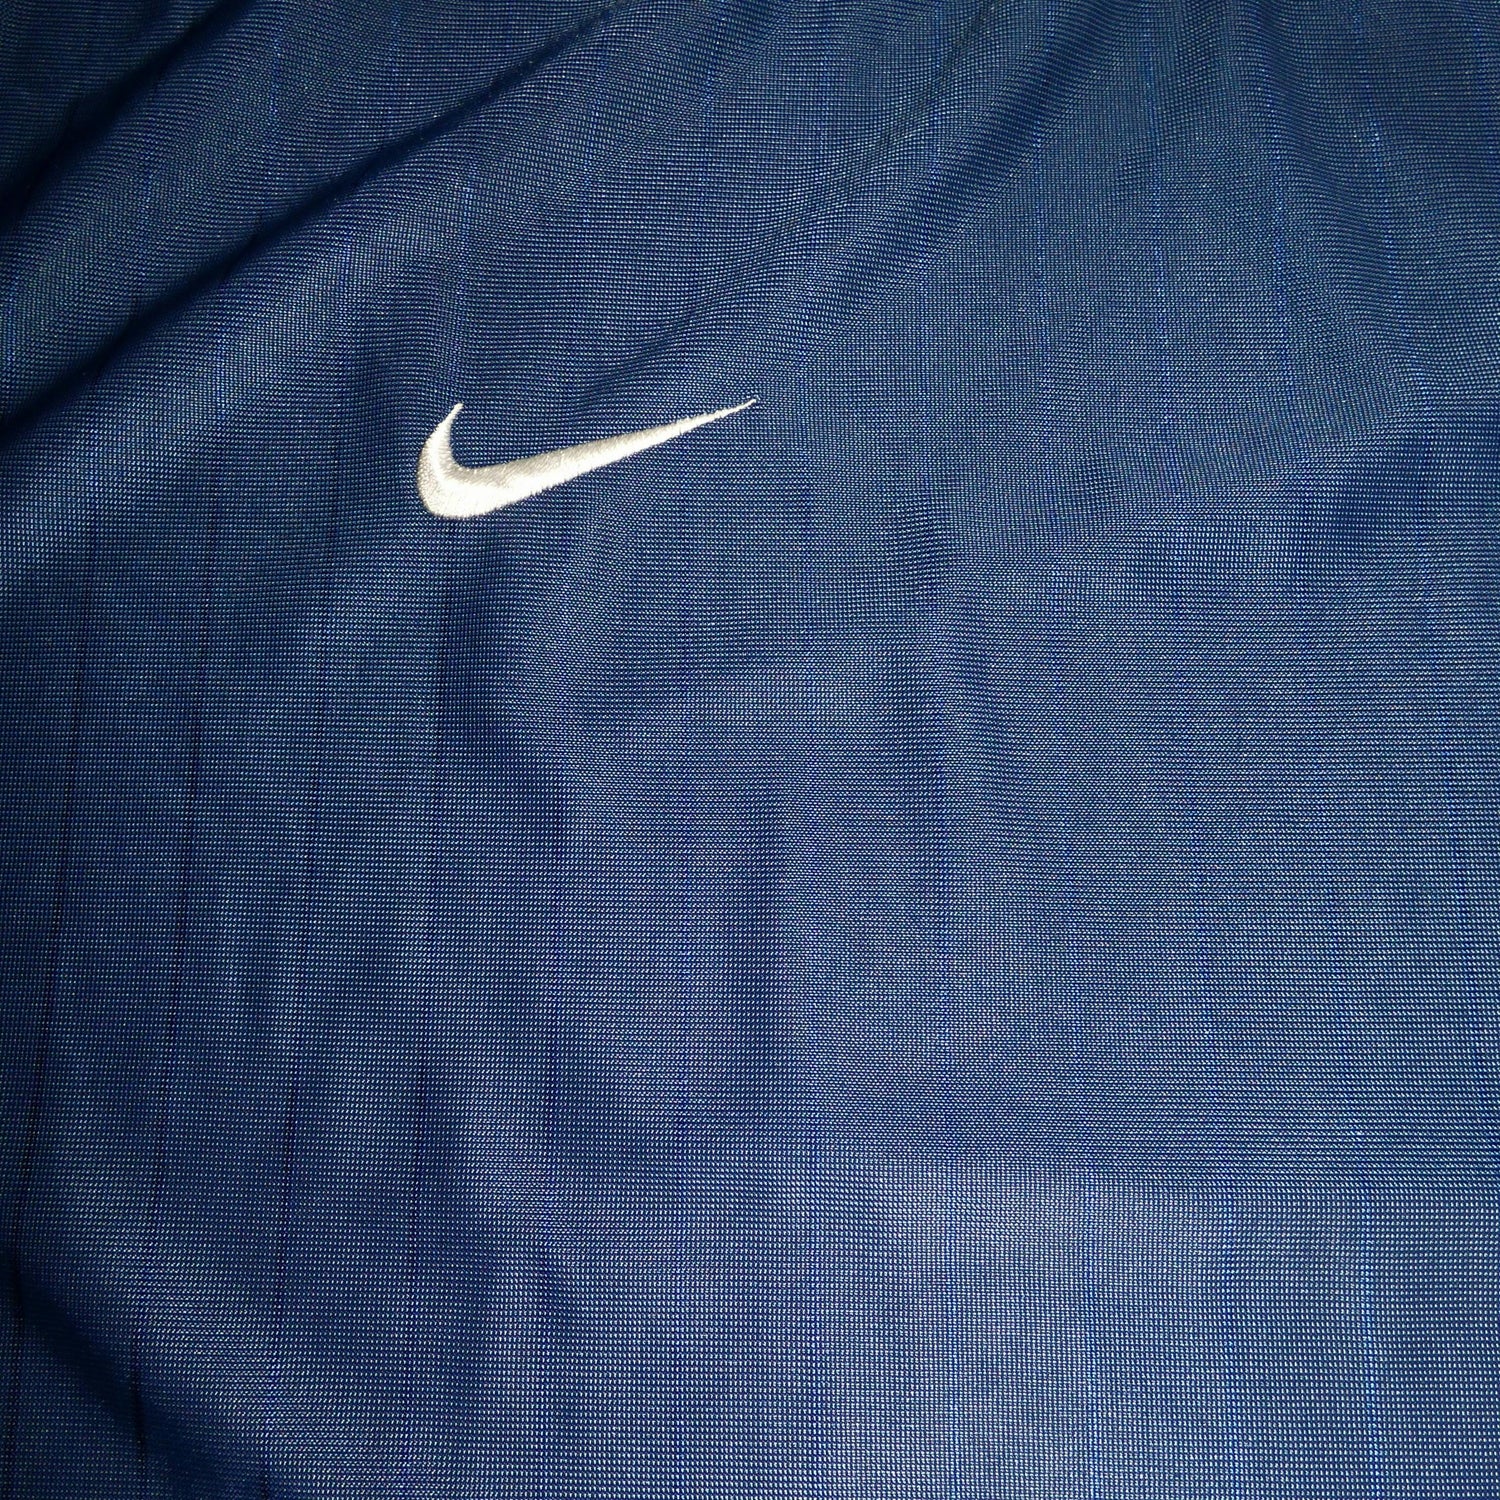 Maglia sportiva Nike (L) - oldstyleclothing